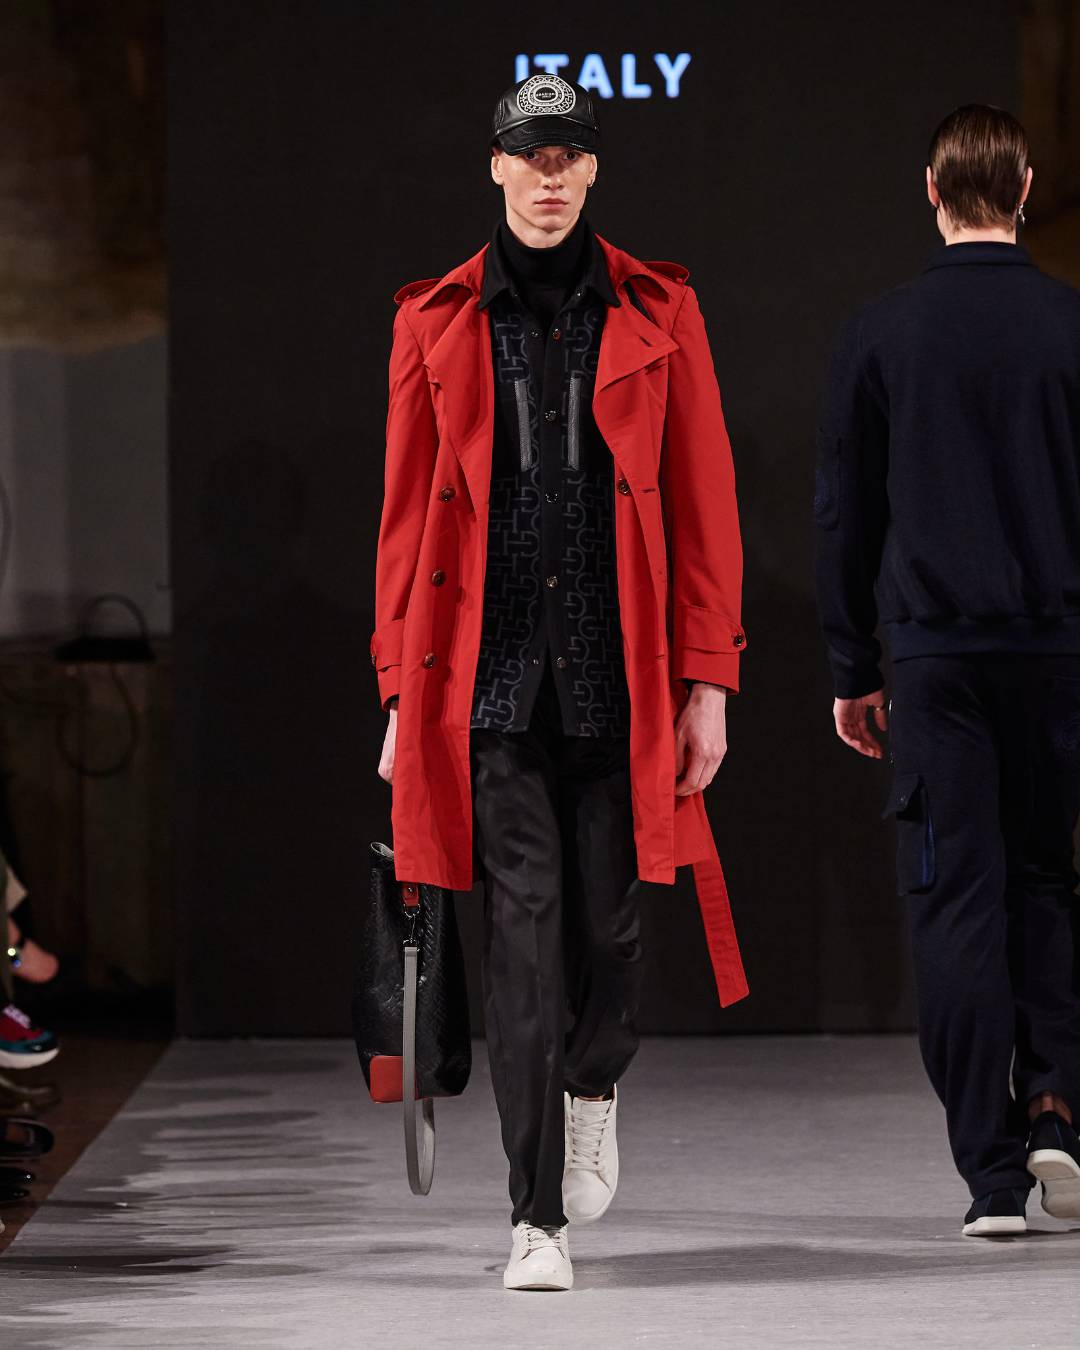 A male model walking down the runway with a red trenchcoat on and a black cap.